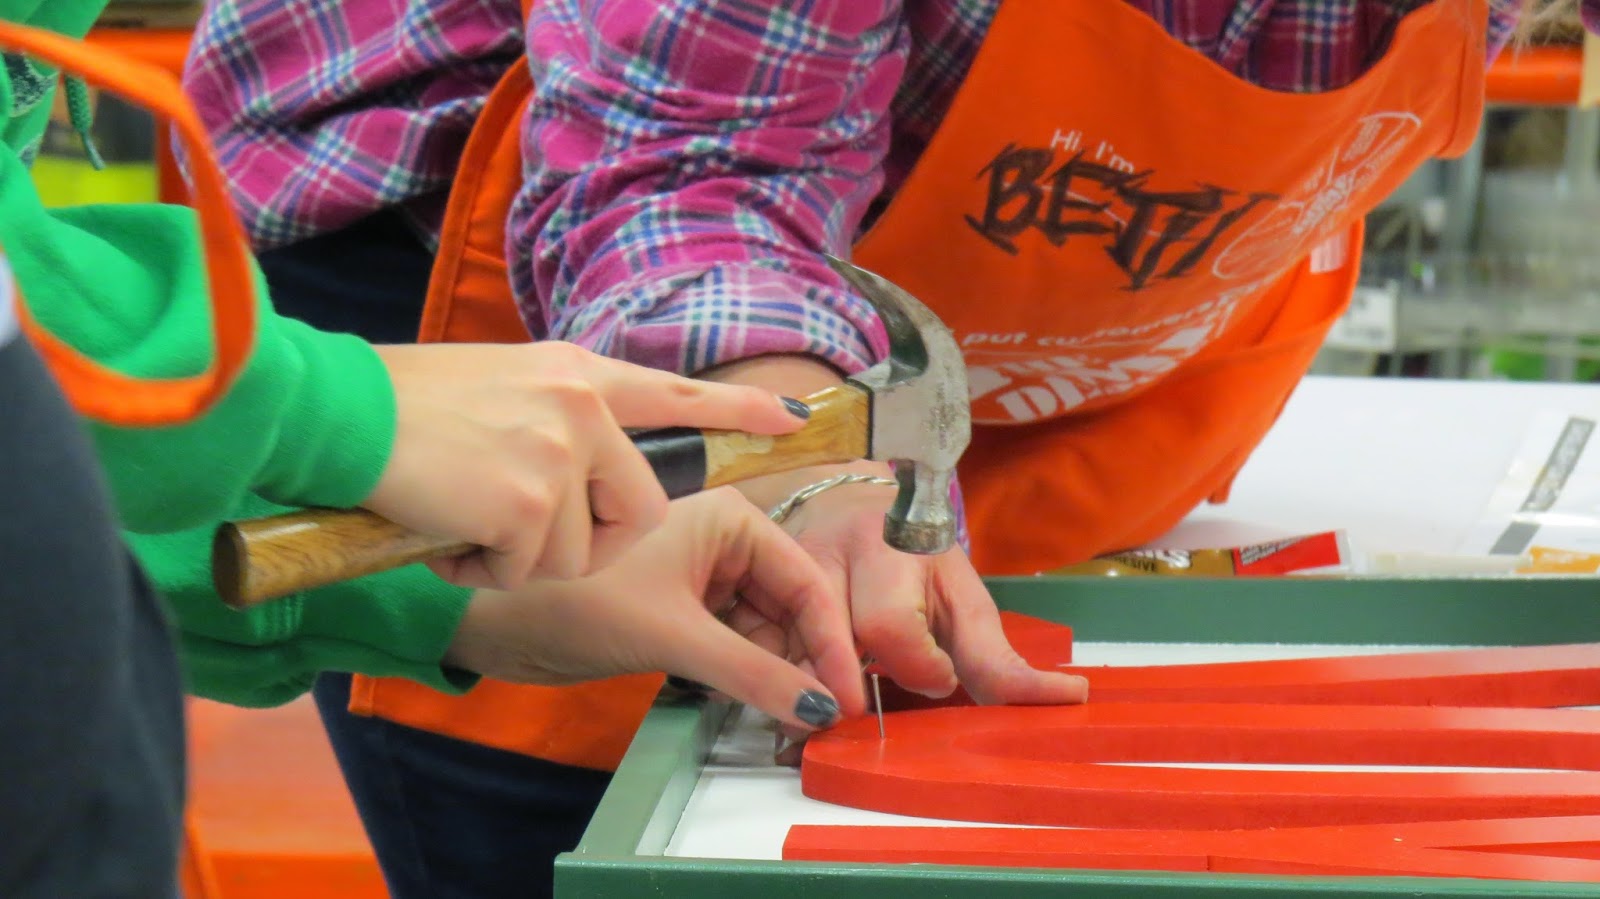 Learning how to build Joy Marquee Sign at Her It Yourself Workshop, Hammer, Nails, Instruction